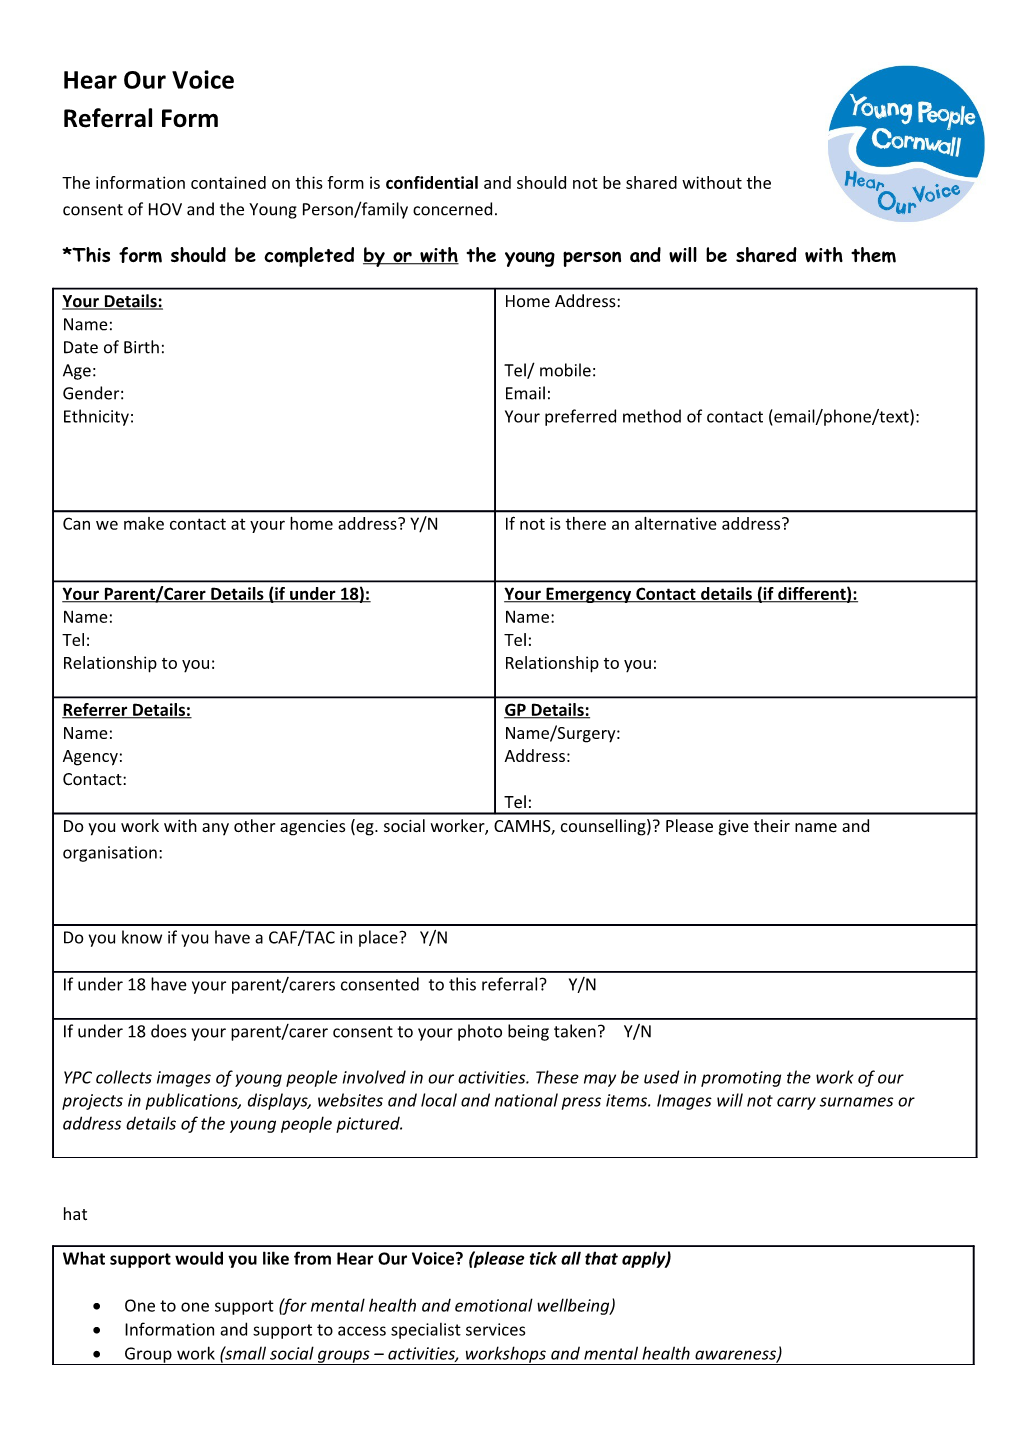 *This Form Should Be Completed by Or with the Young Person and Will Be Shared with Them